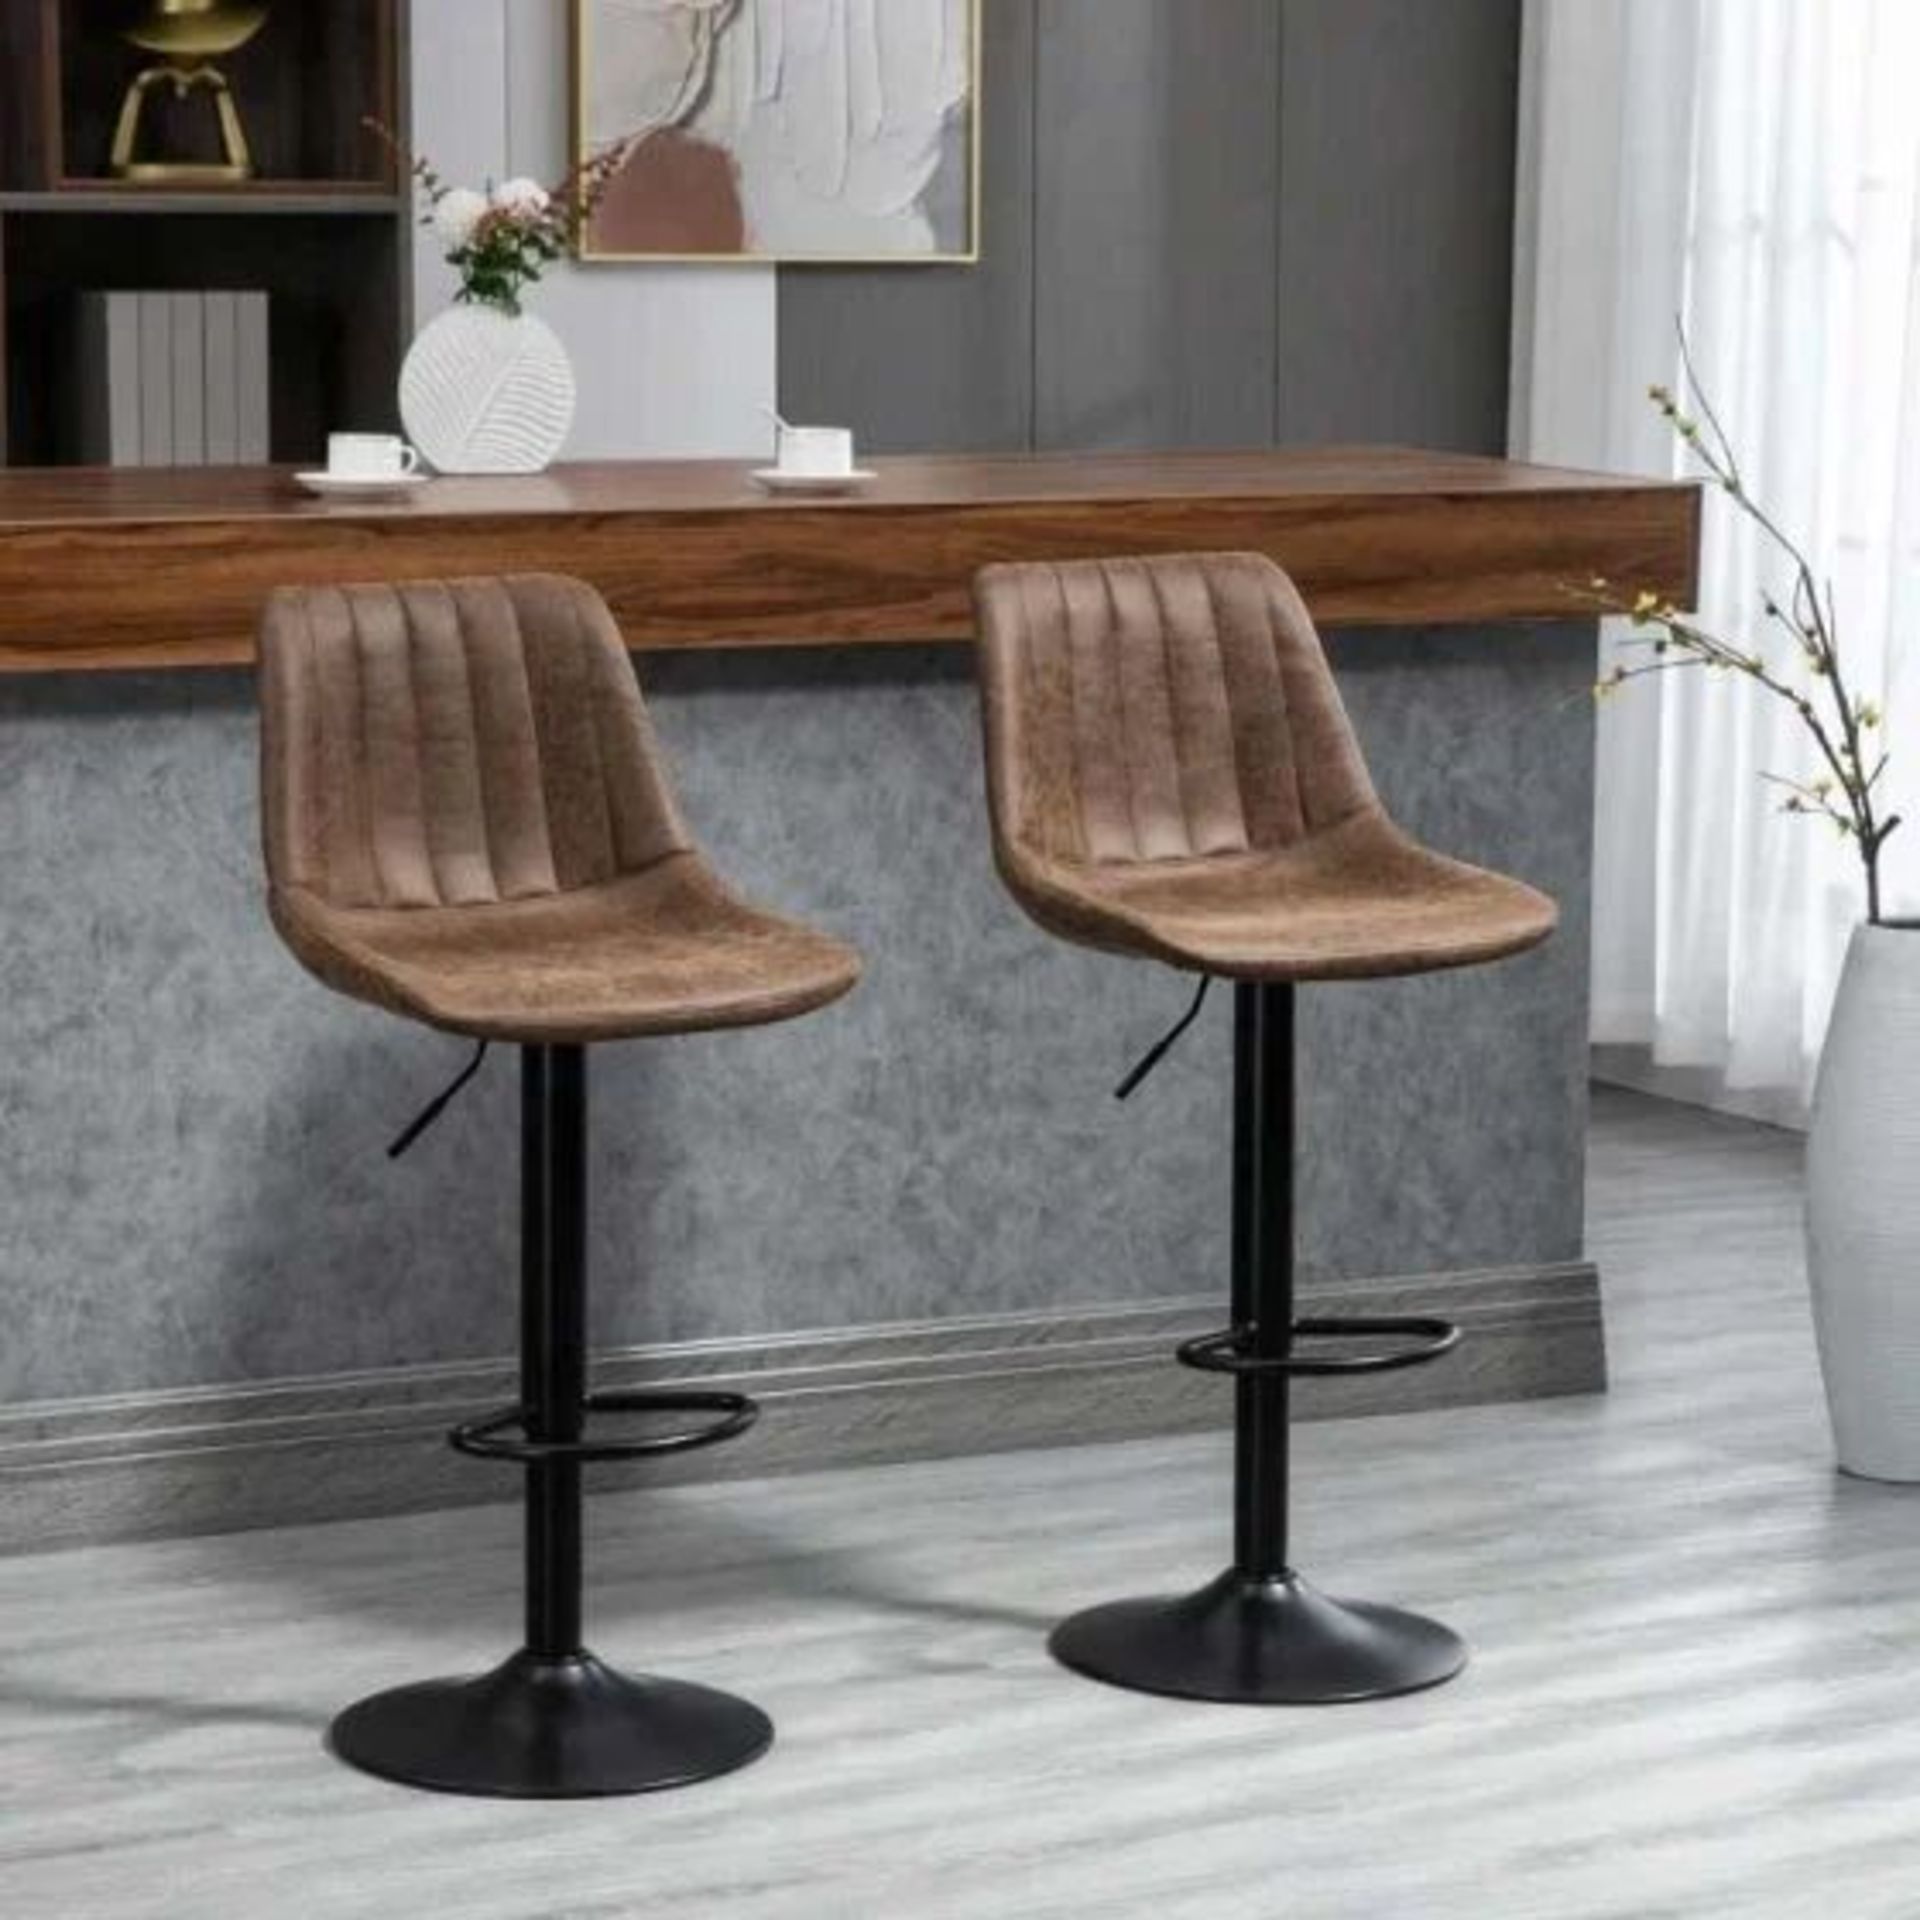 HOMCOM 2 Piece Height Adjustable Bar Stools & 360° Swivel With Footrests - Brown/Black - 835-